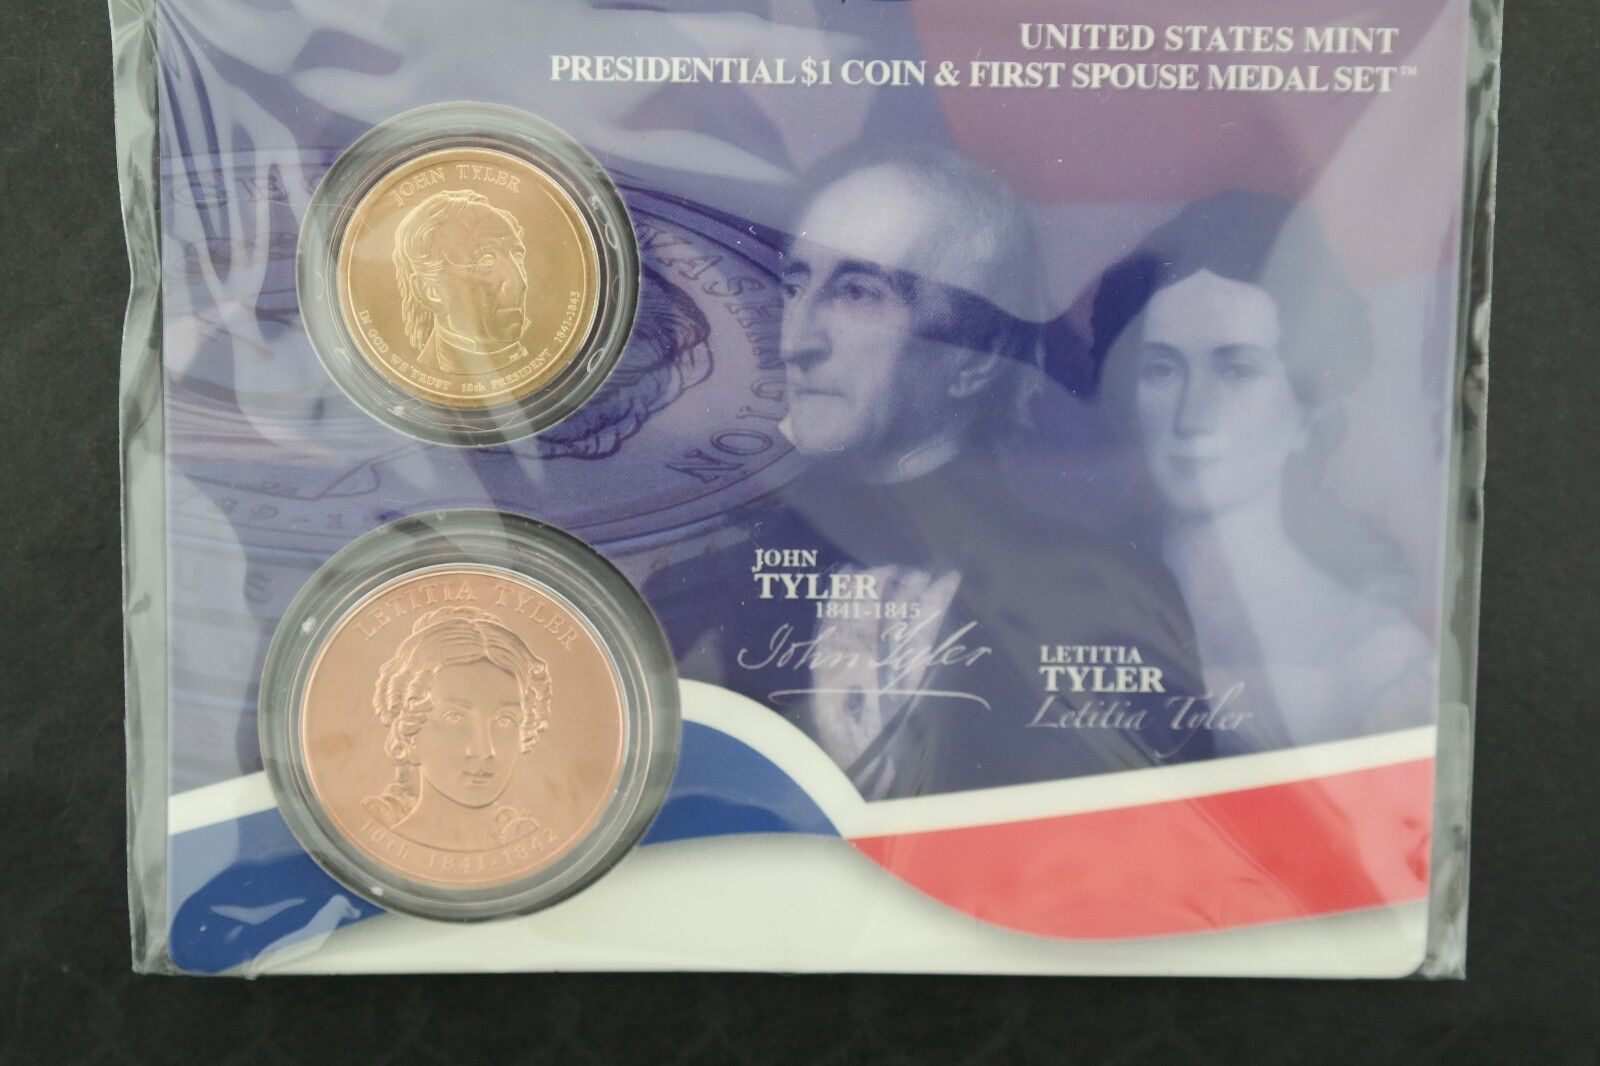 United States Mint Presidential $1 Coin & First Spouse Medal Set - Tyler Без бренда